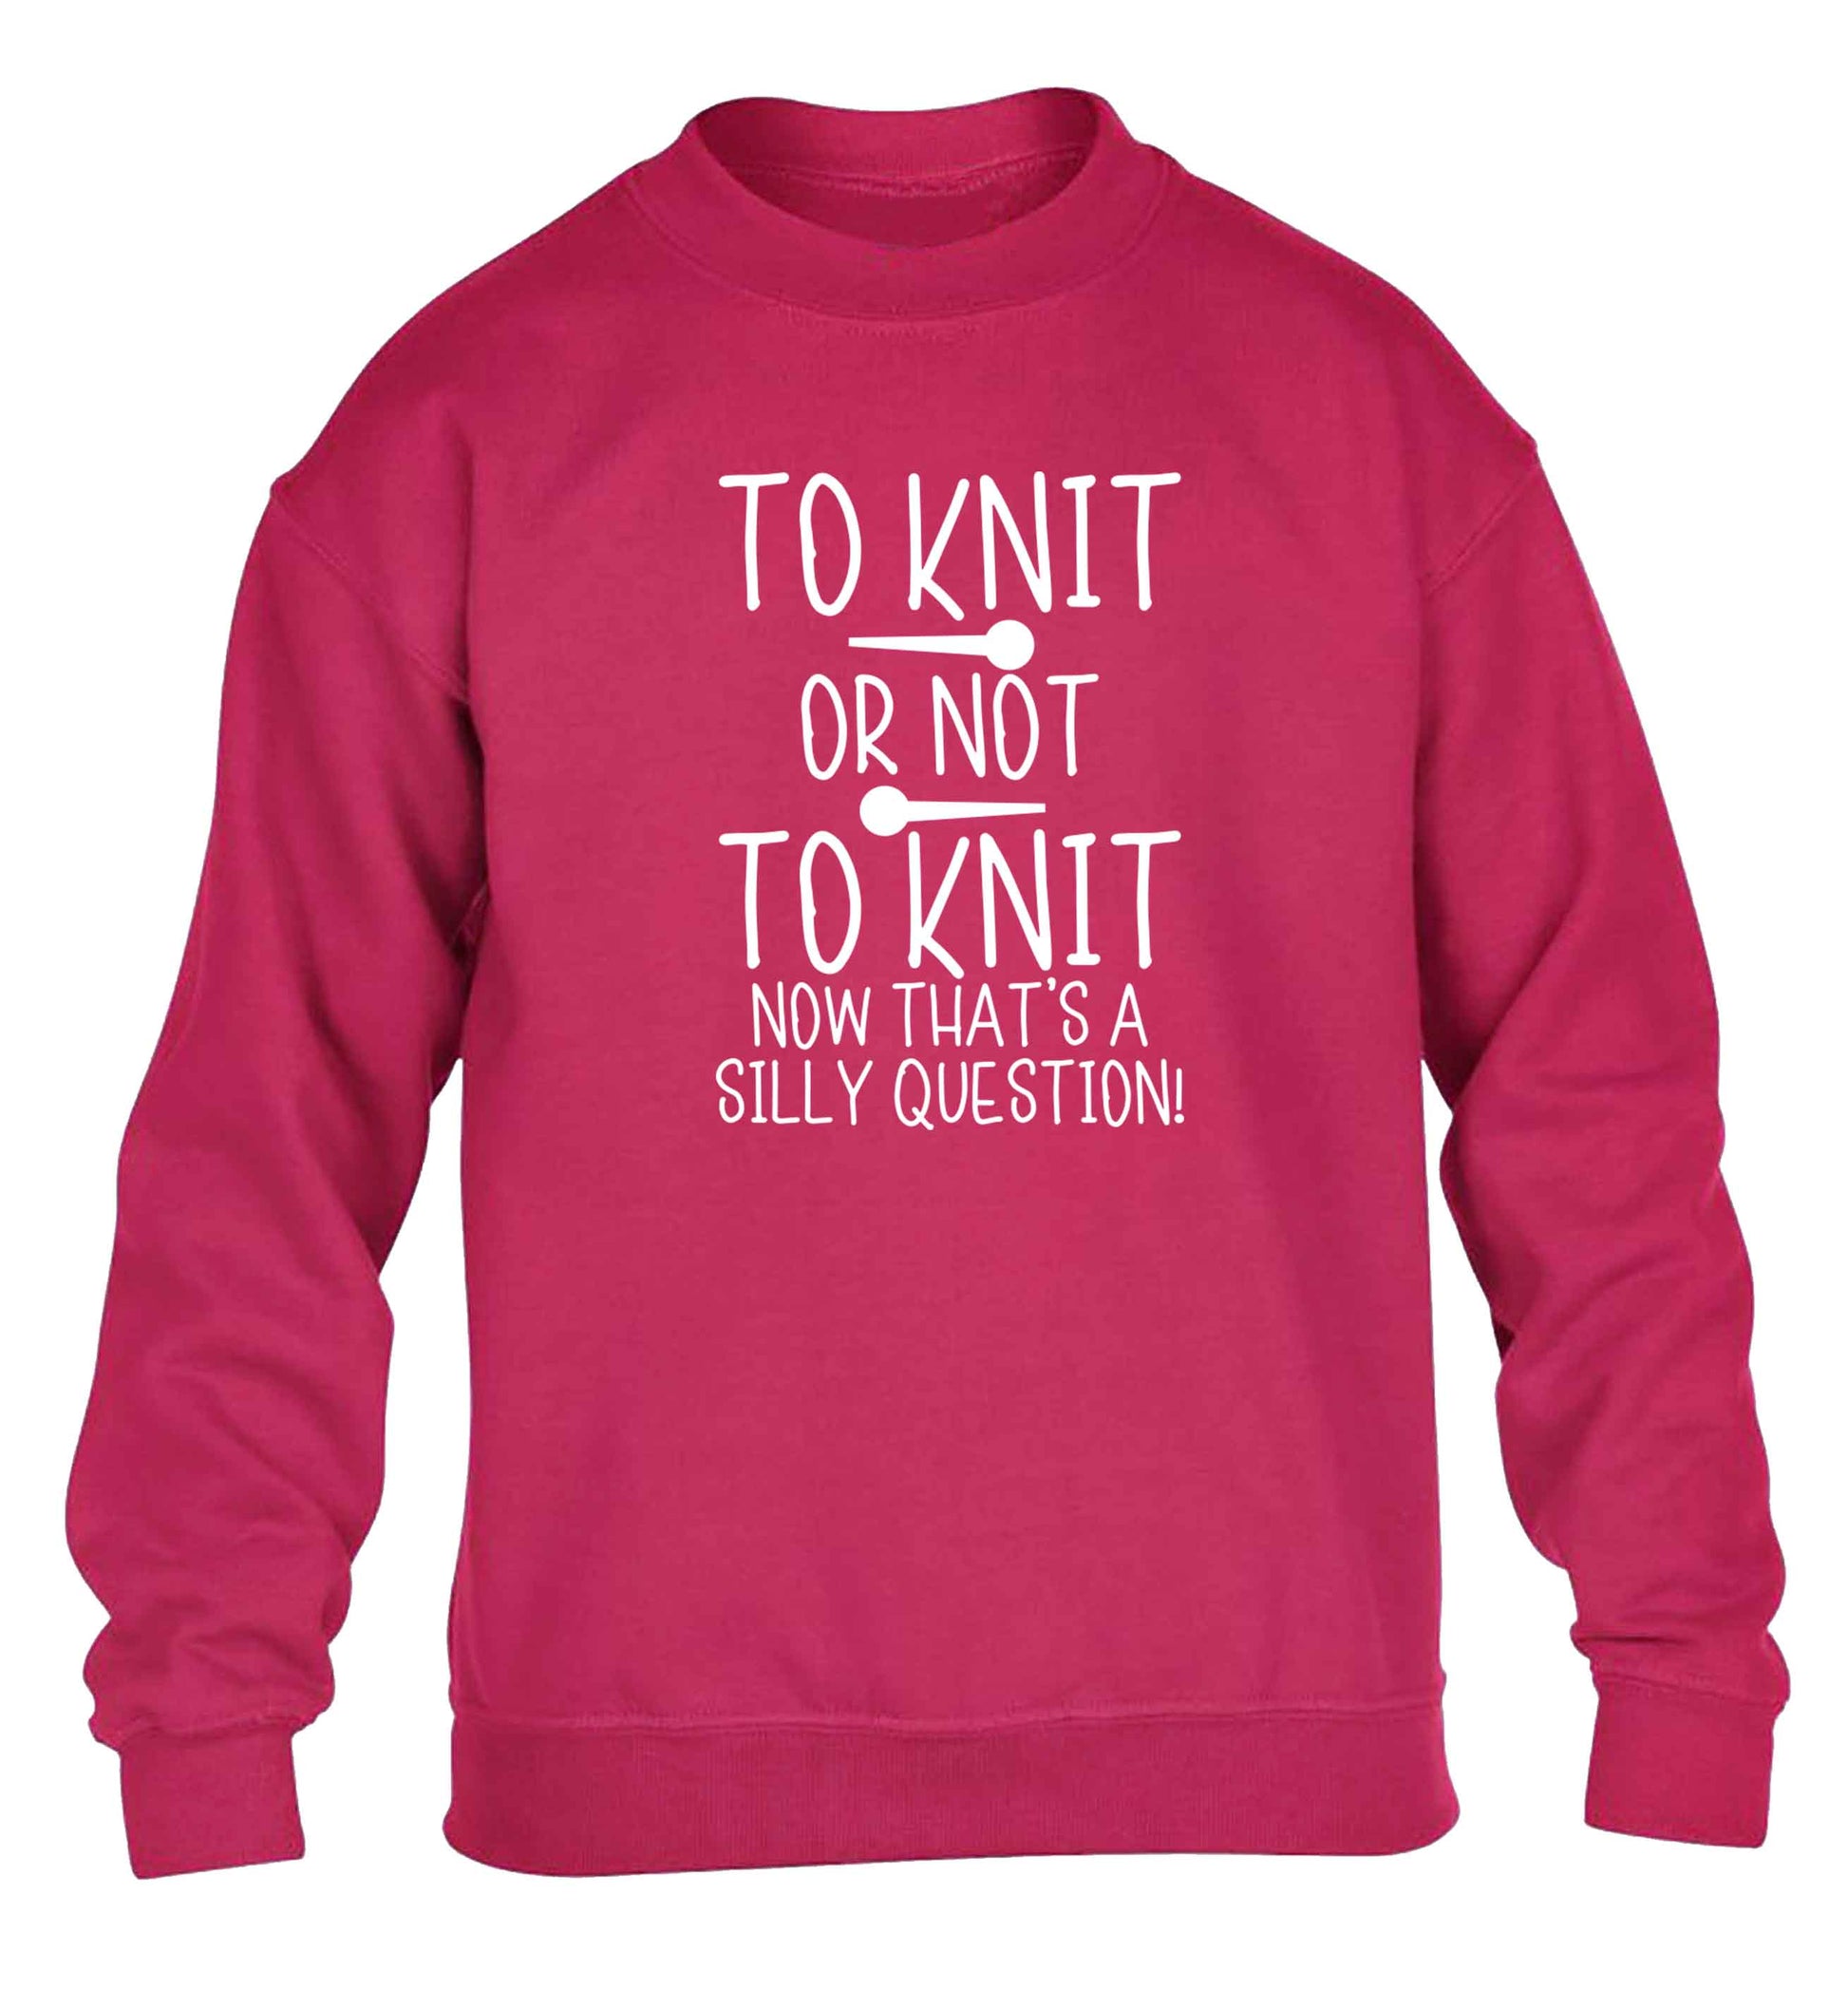 To knit or not to knit now that's a silly question children's pink sweater 12-13 Years